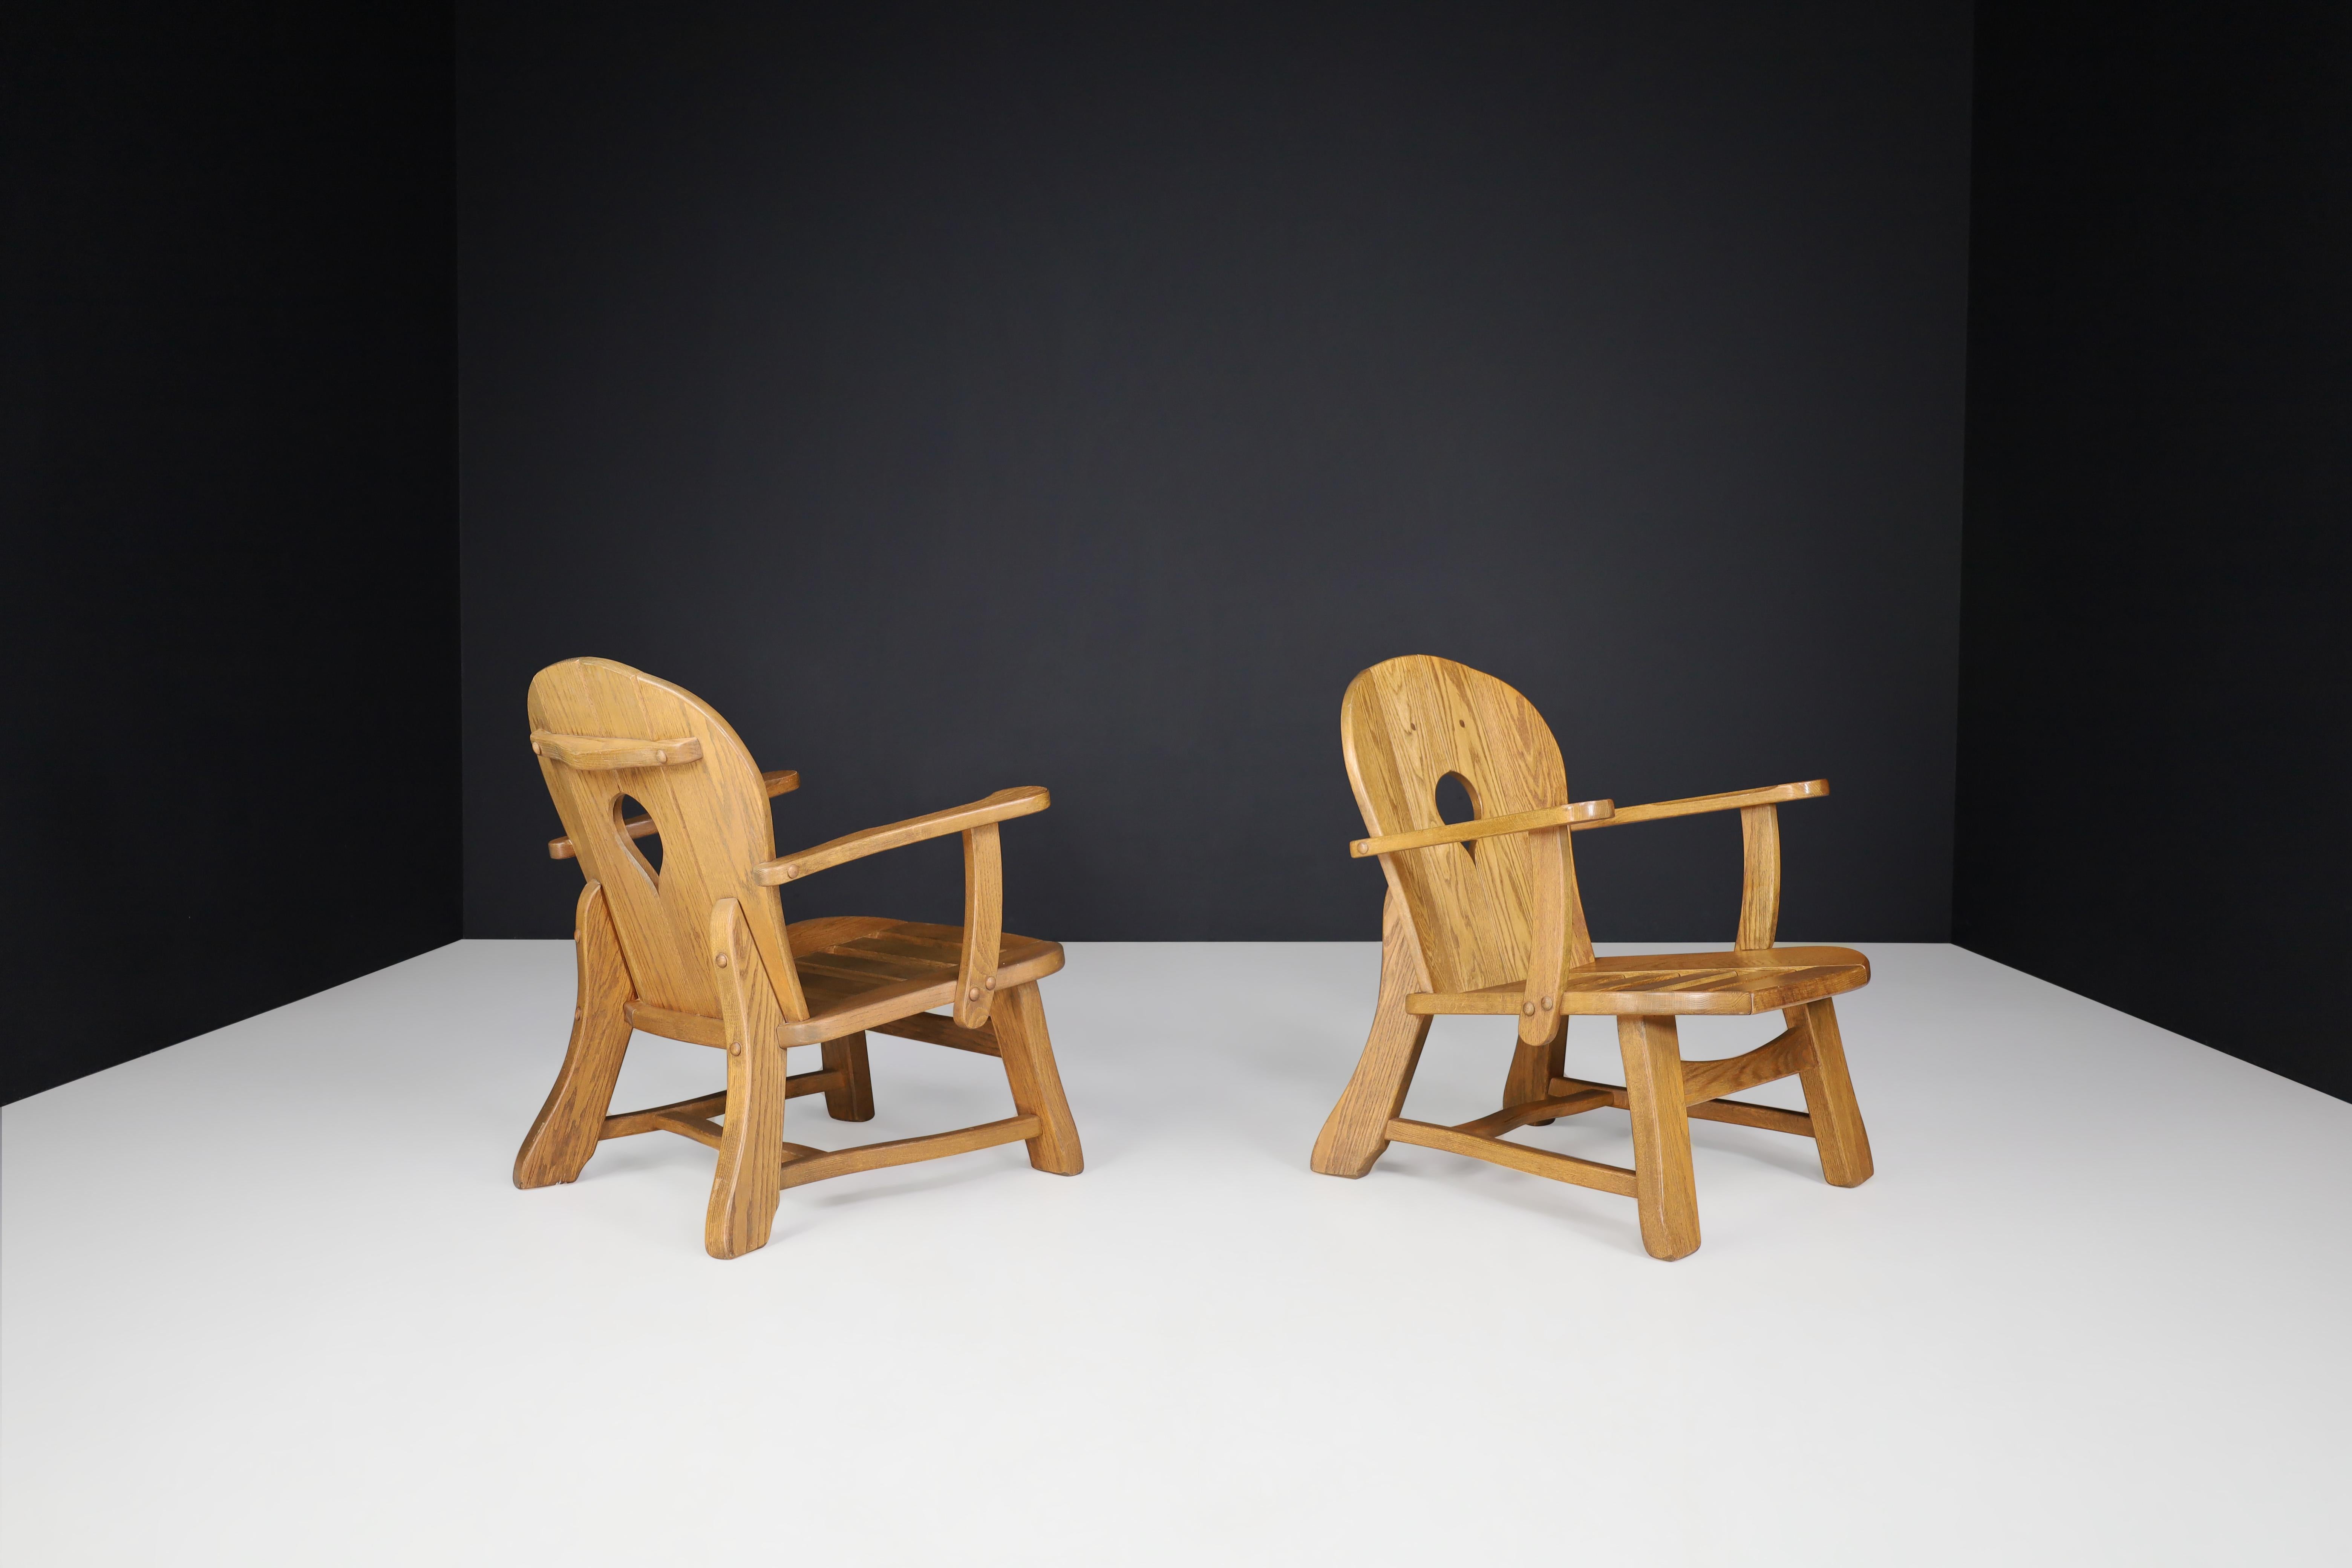 Sculptural Lounge Chairs in Oak, France, 1960s For Sale 7